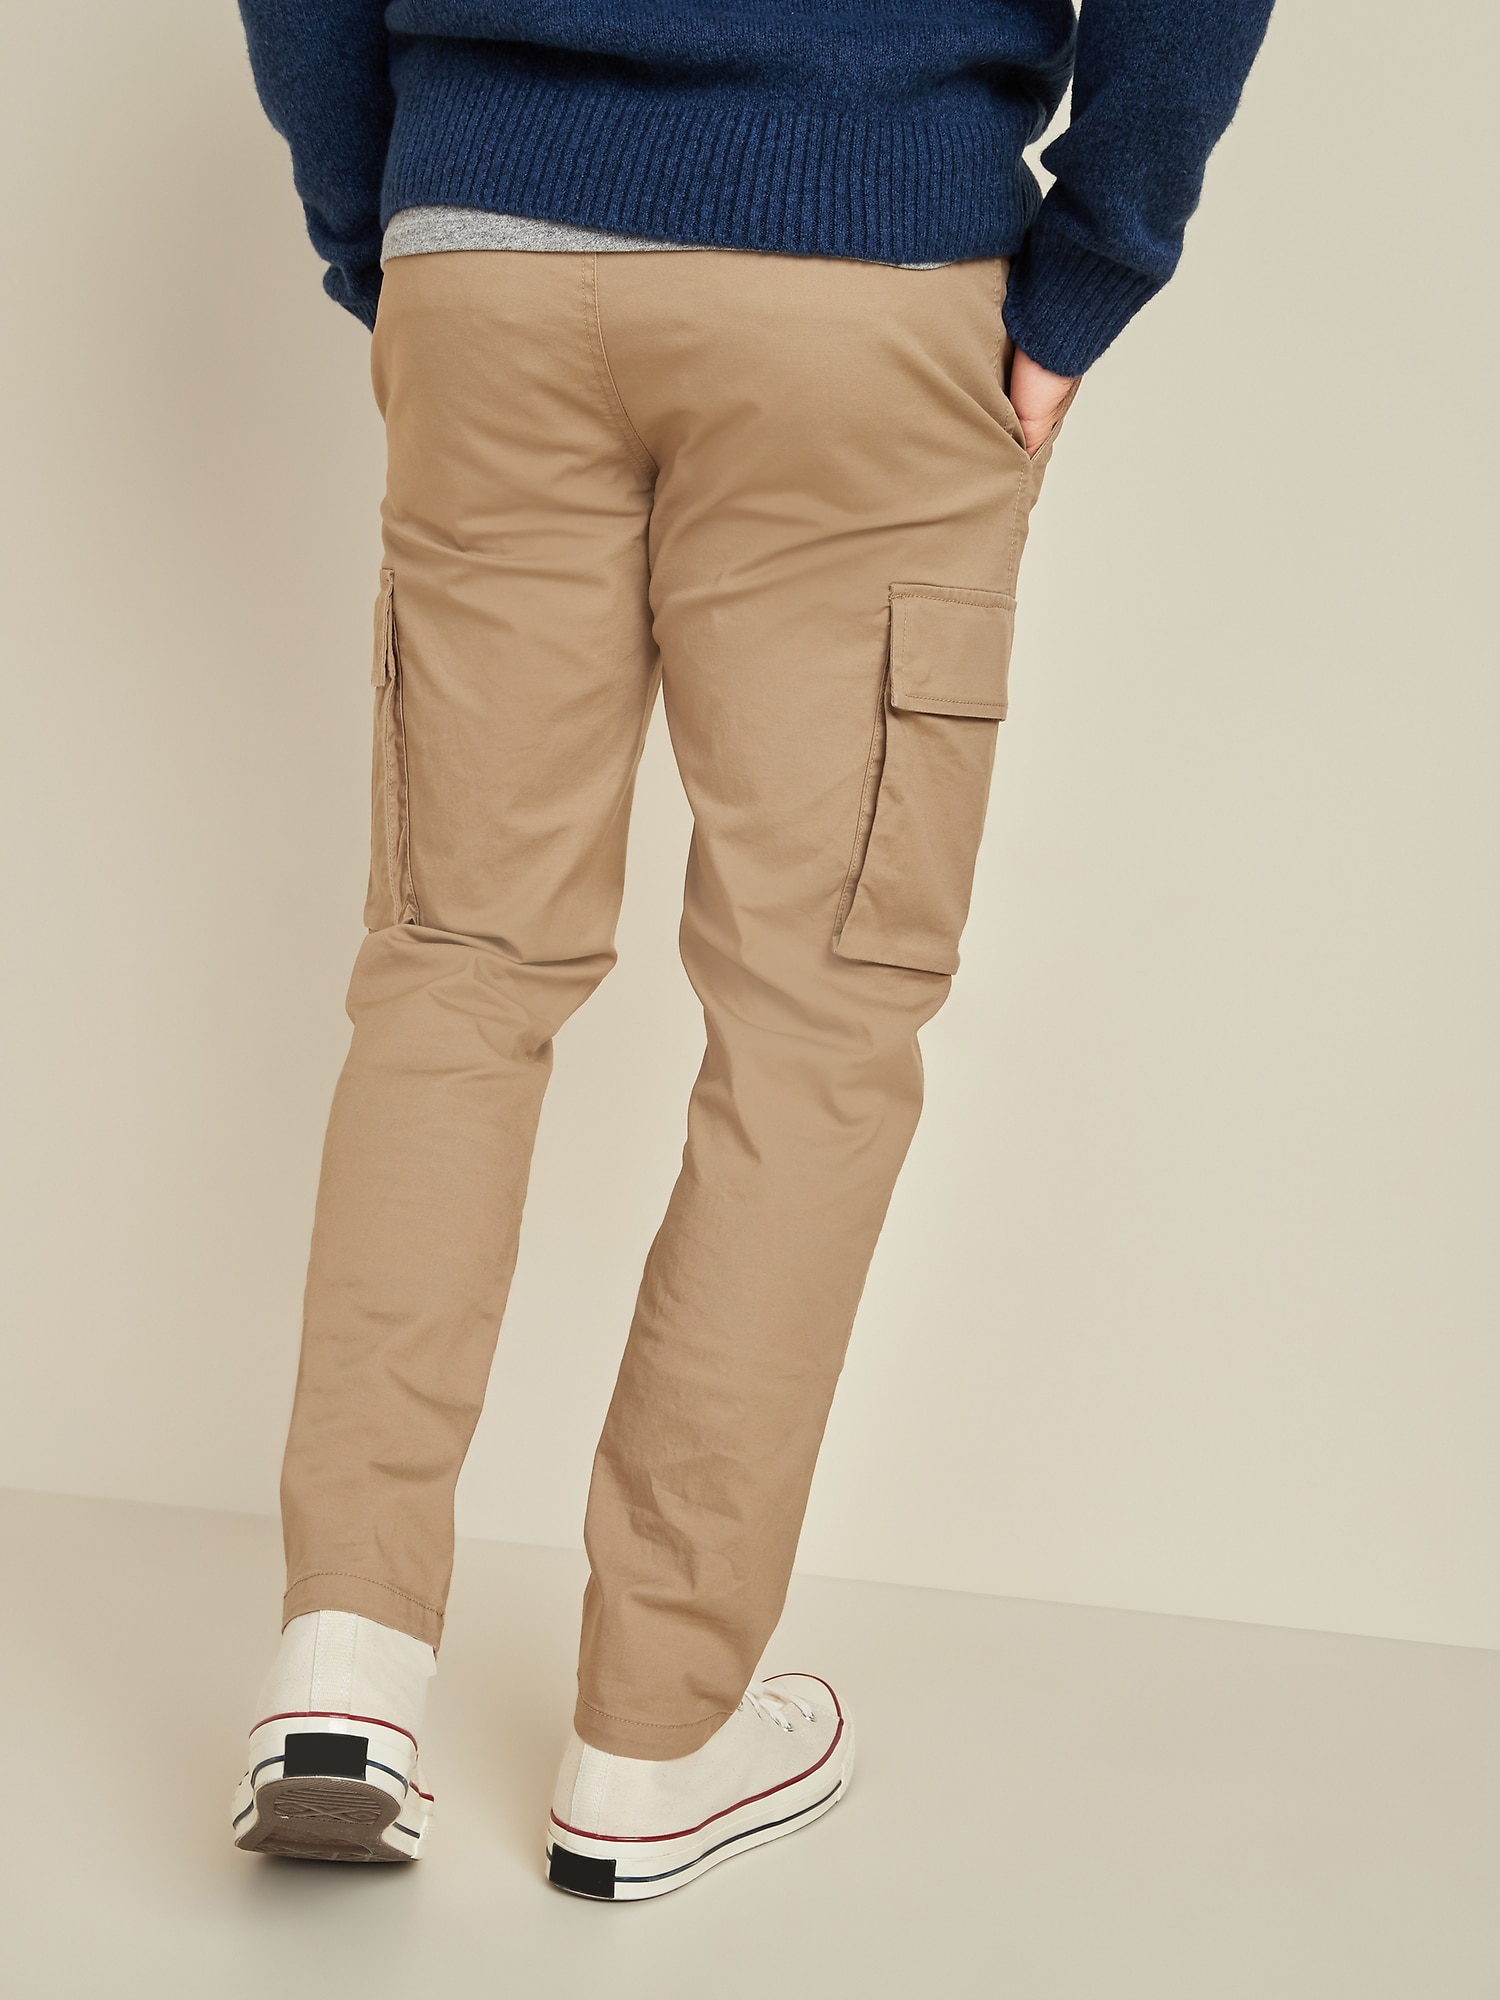 tapered mens cargo pants